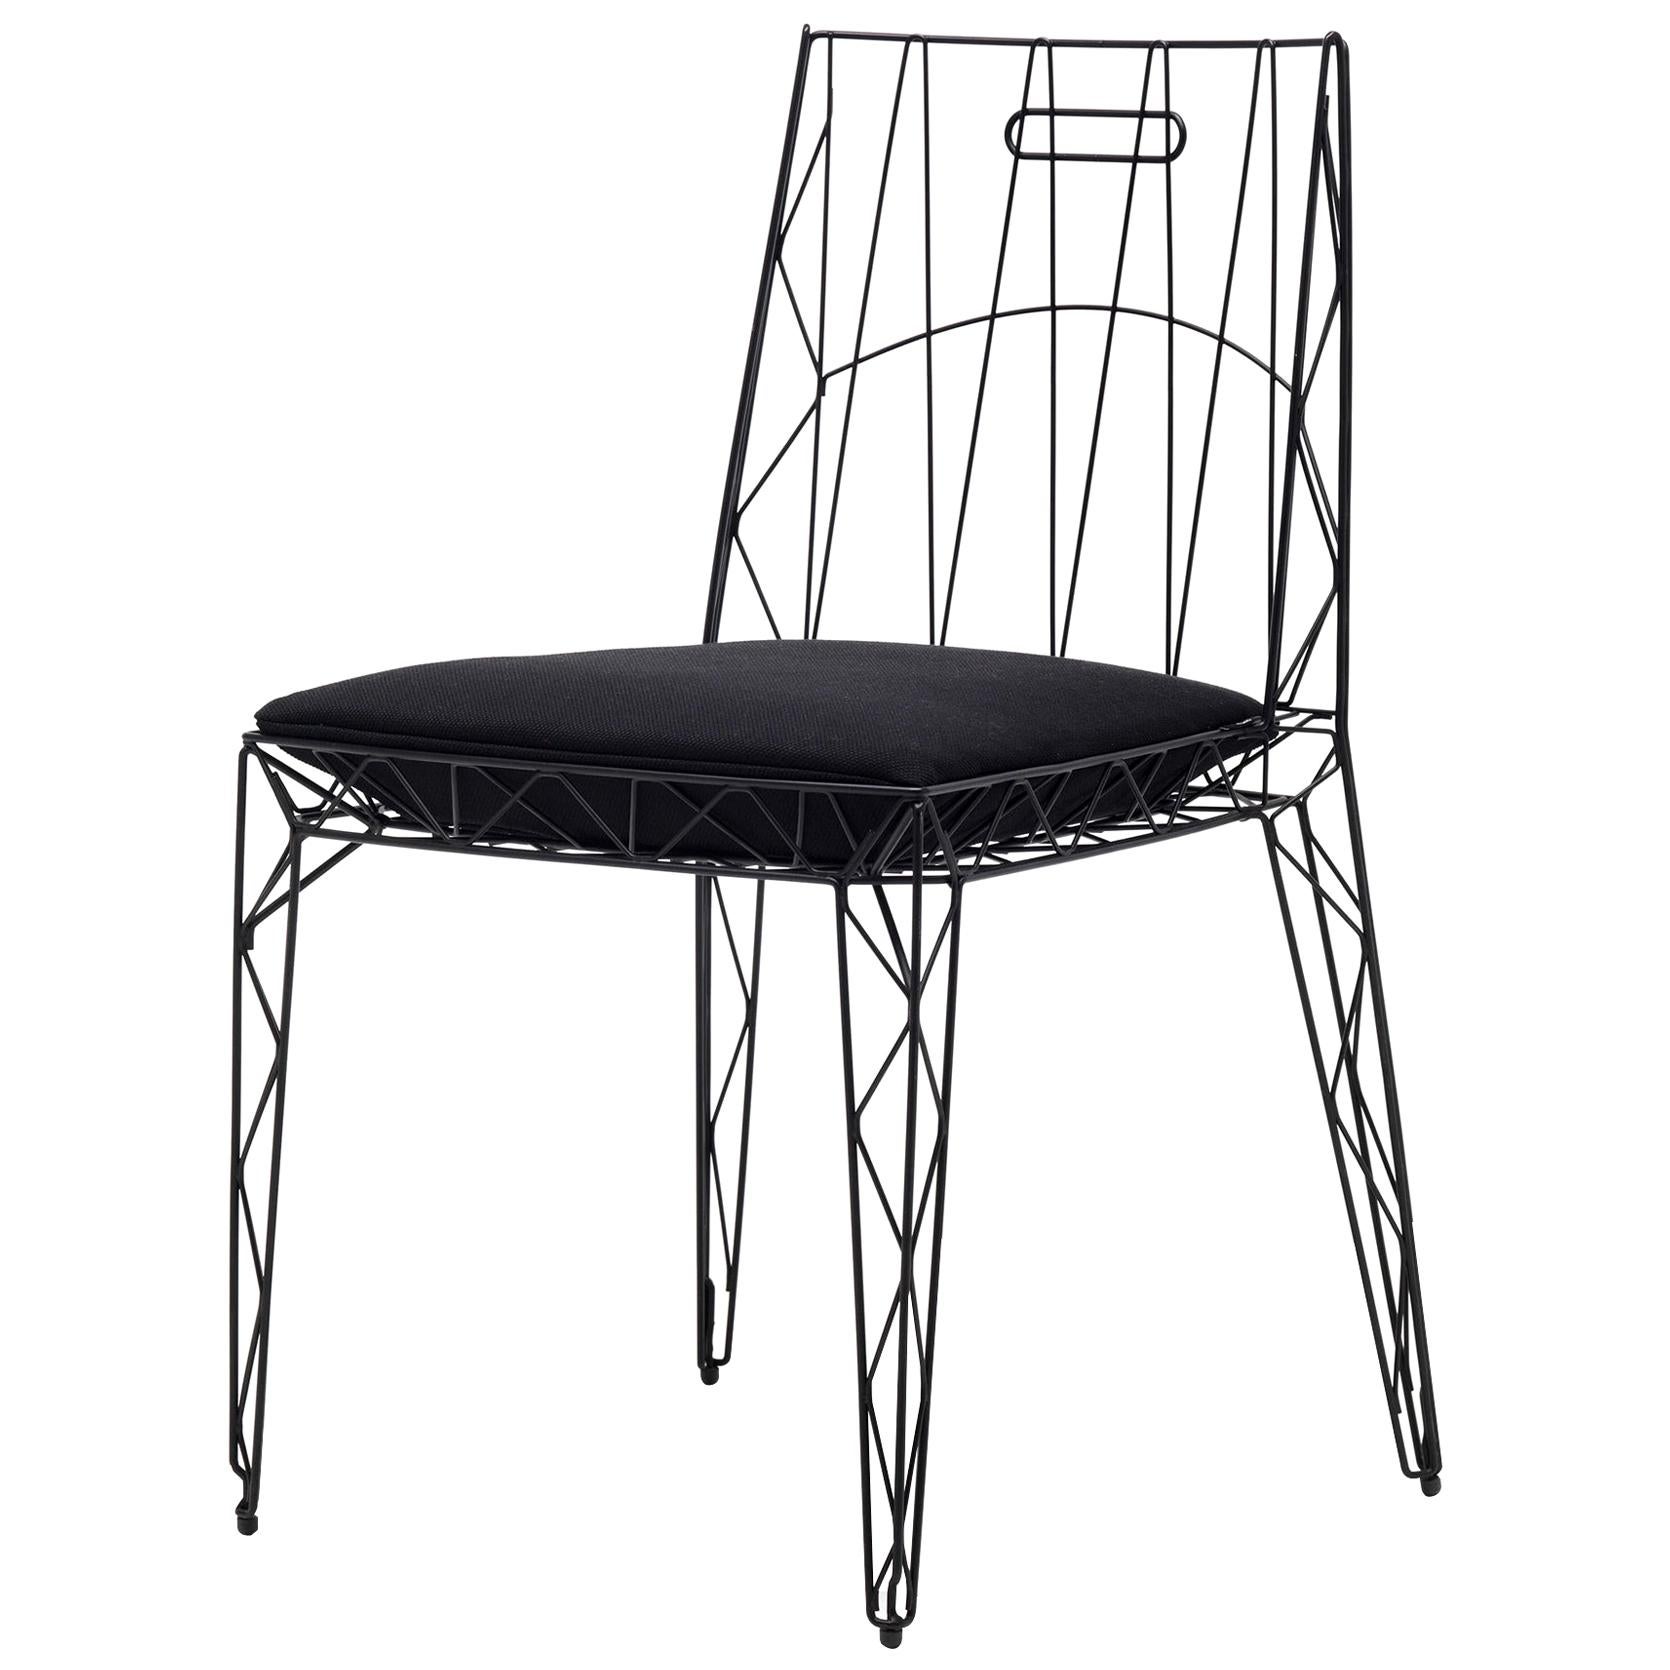 21st Century Modern Ultralight Chair With Steel Wire Frame and Fabric Cushions